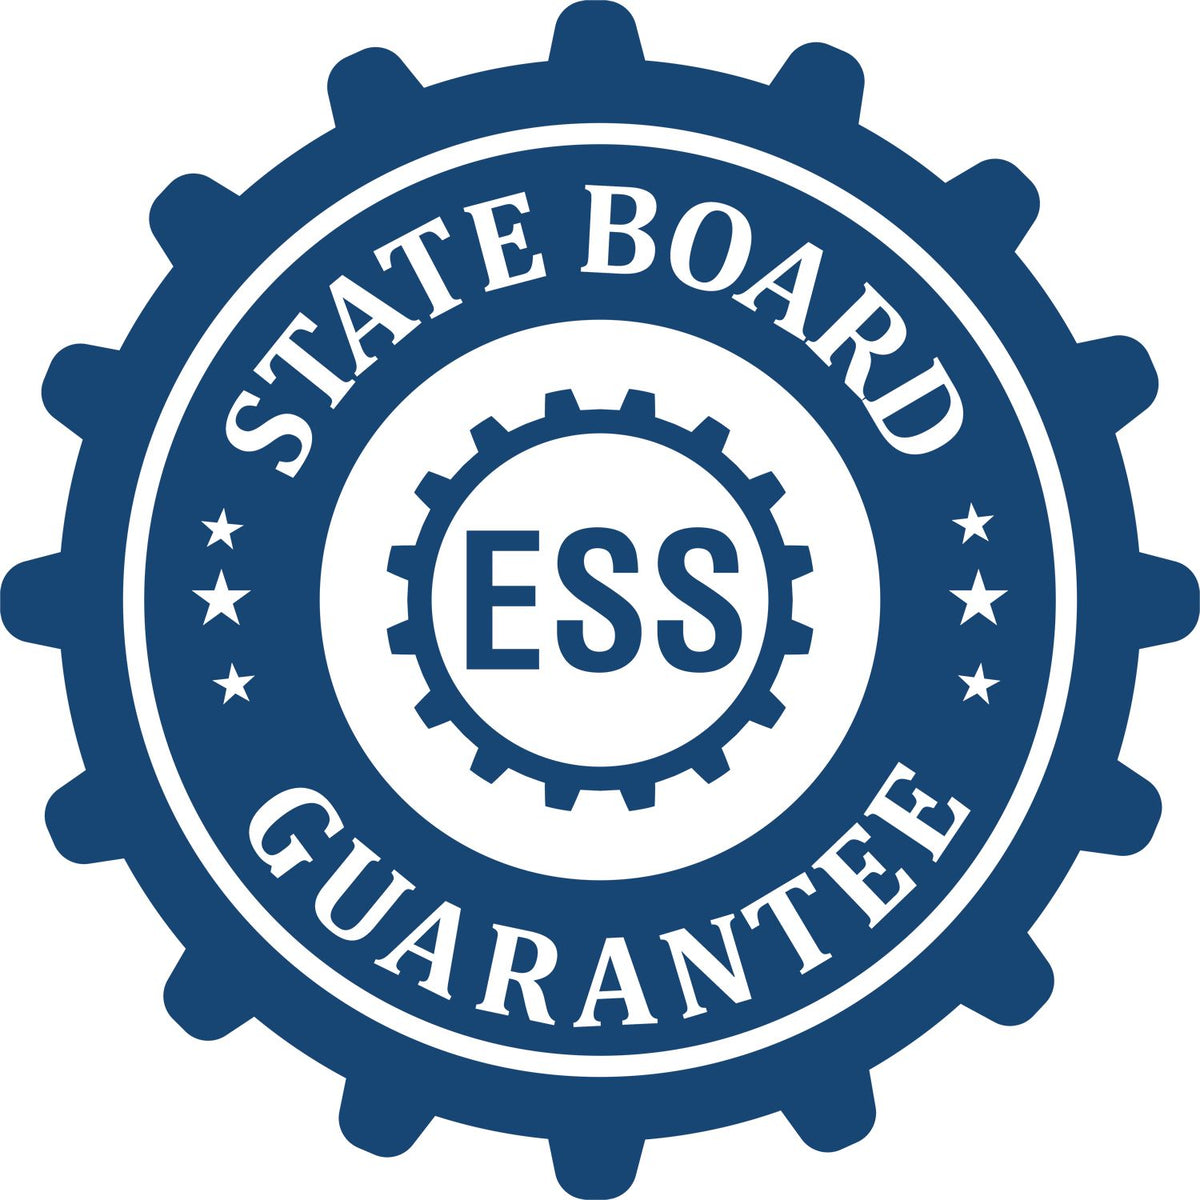 An emblem in a gear shape illustrating a state board guarantee for the Hybrid New Jersey Land Surveyor Seal